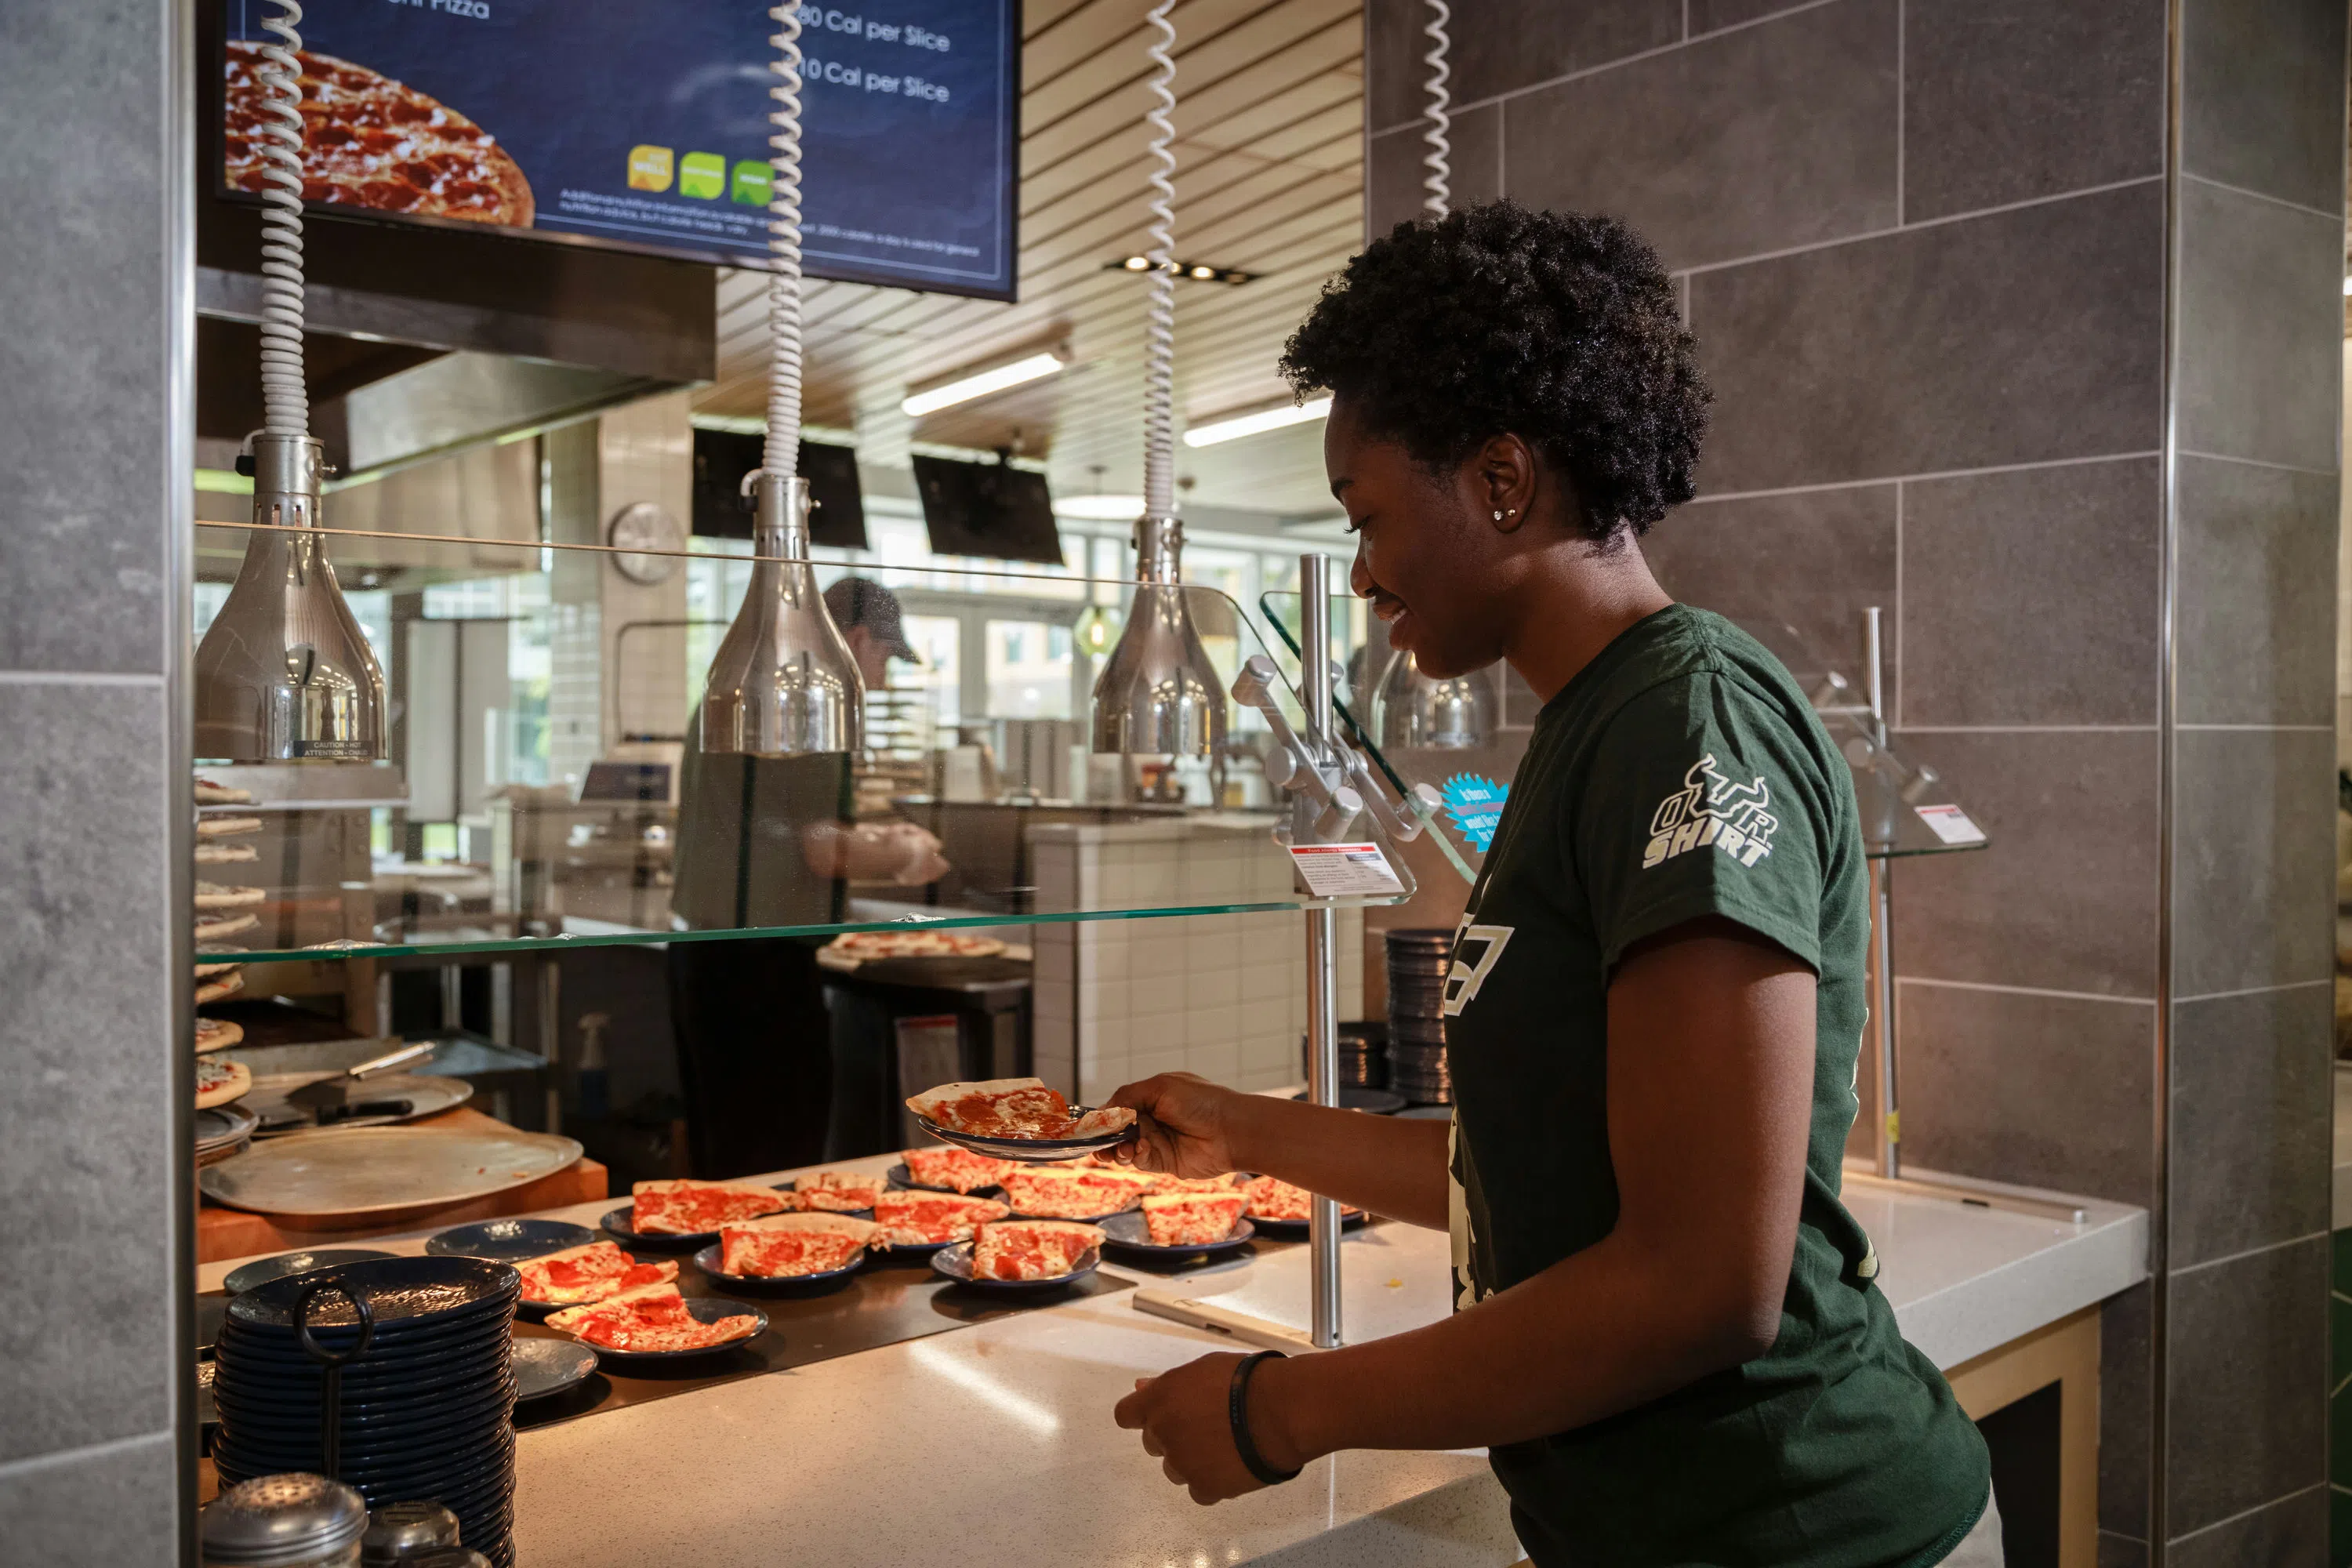 A student grabbing a slice of pizza at The Hub dining hall.